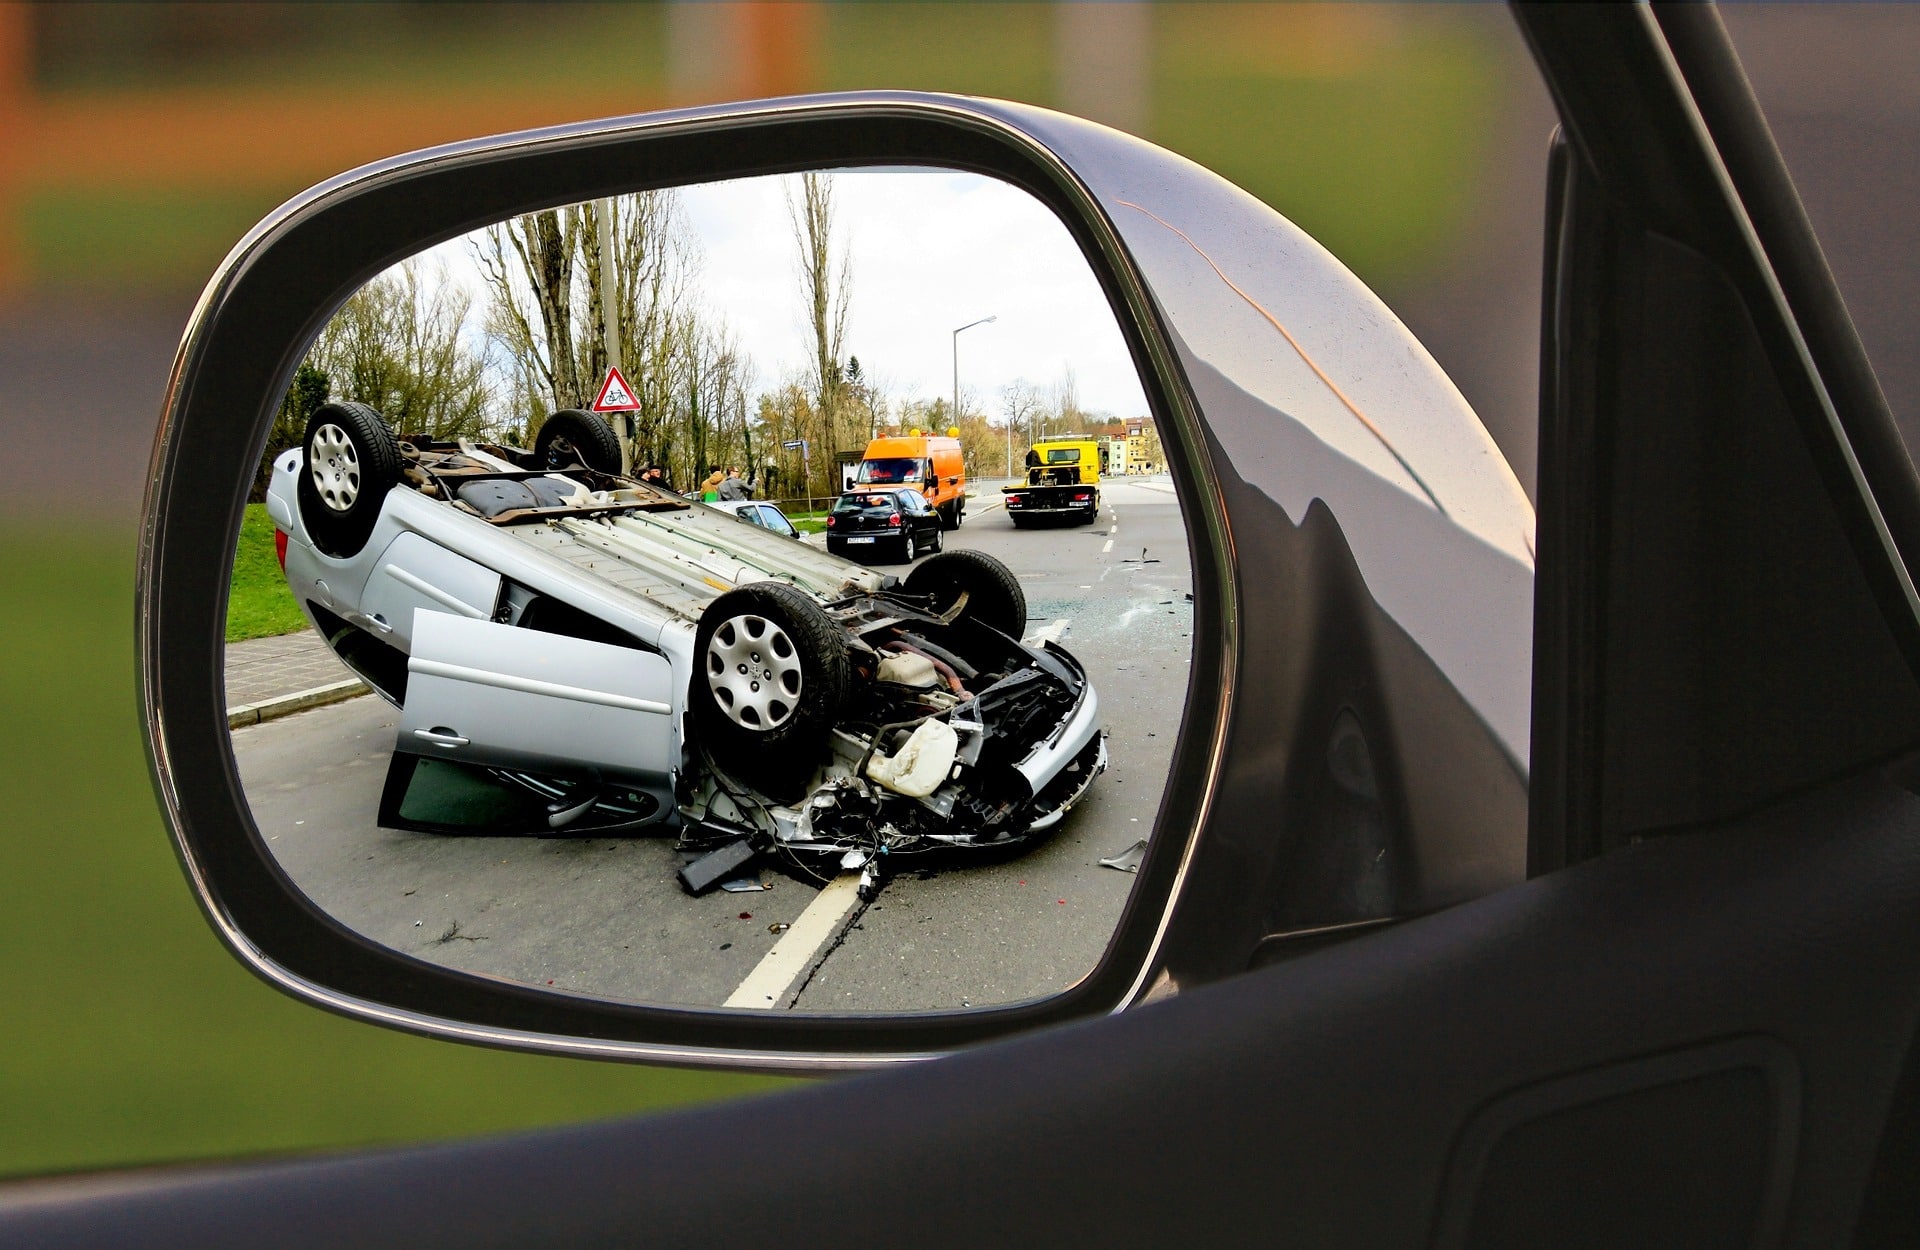 Car accident in the rear mirror